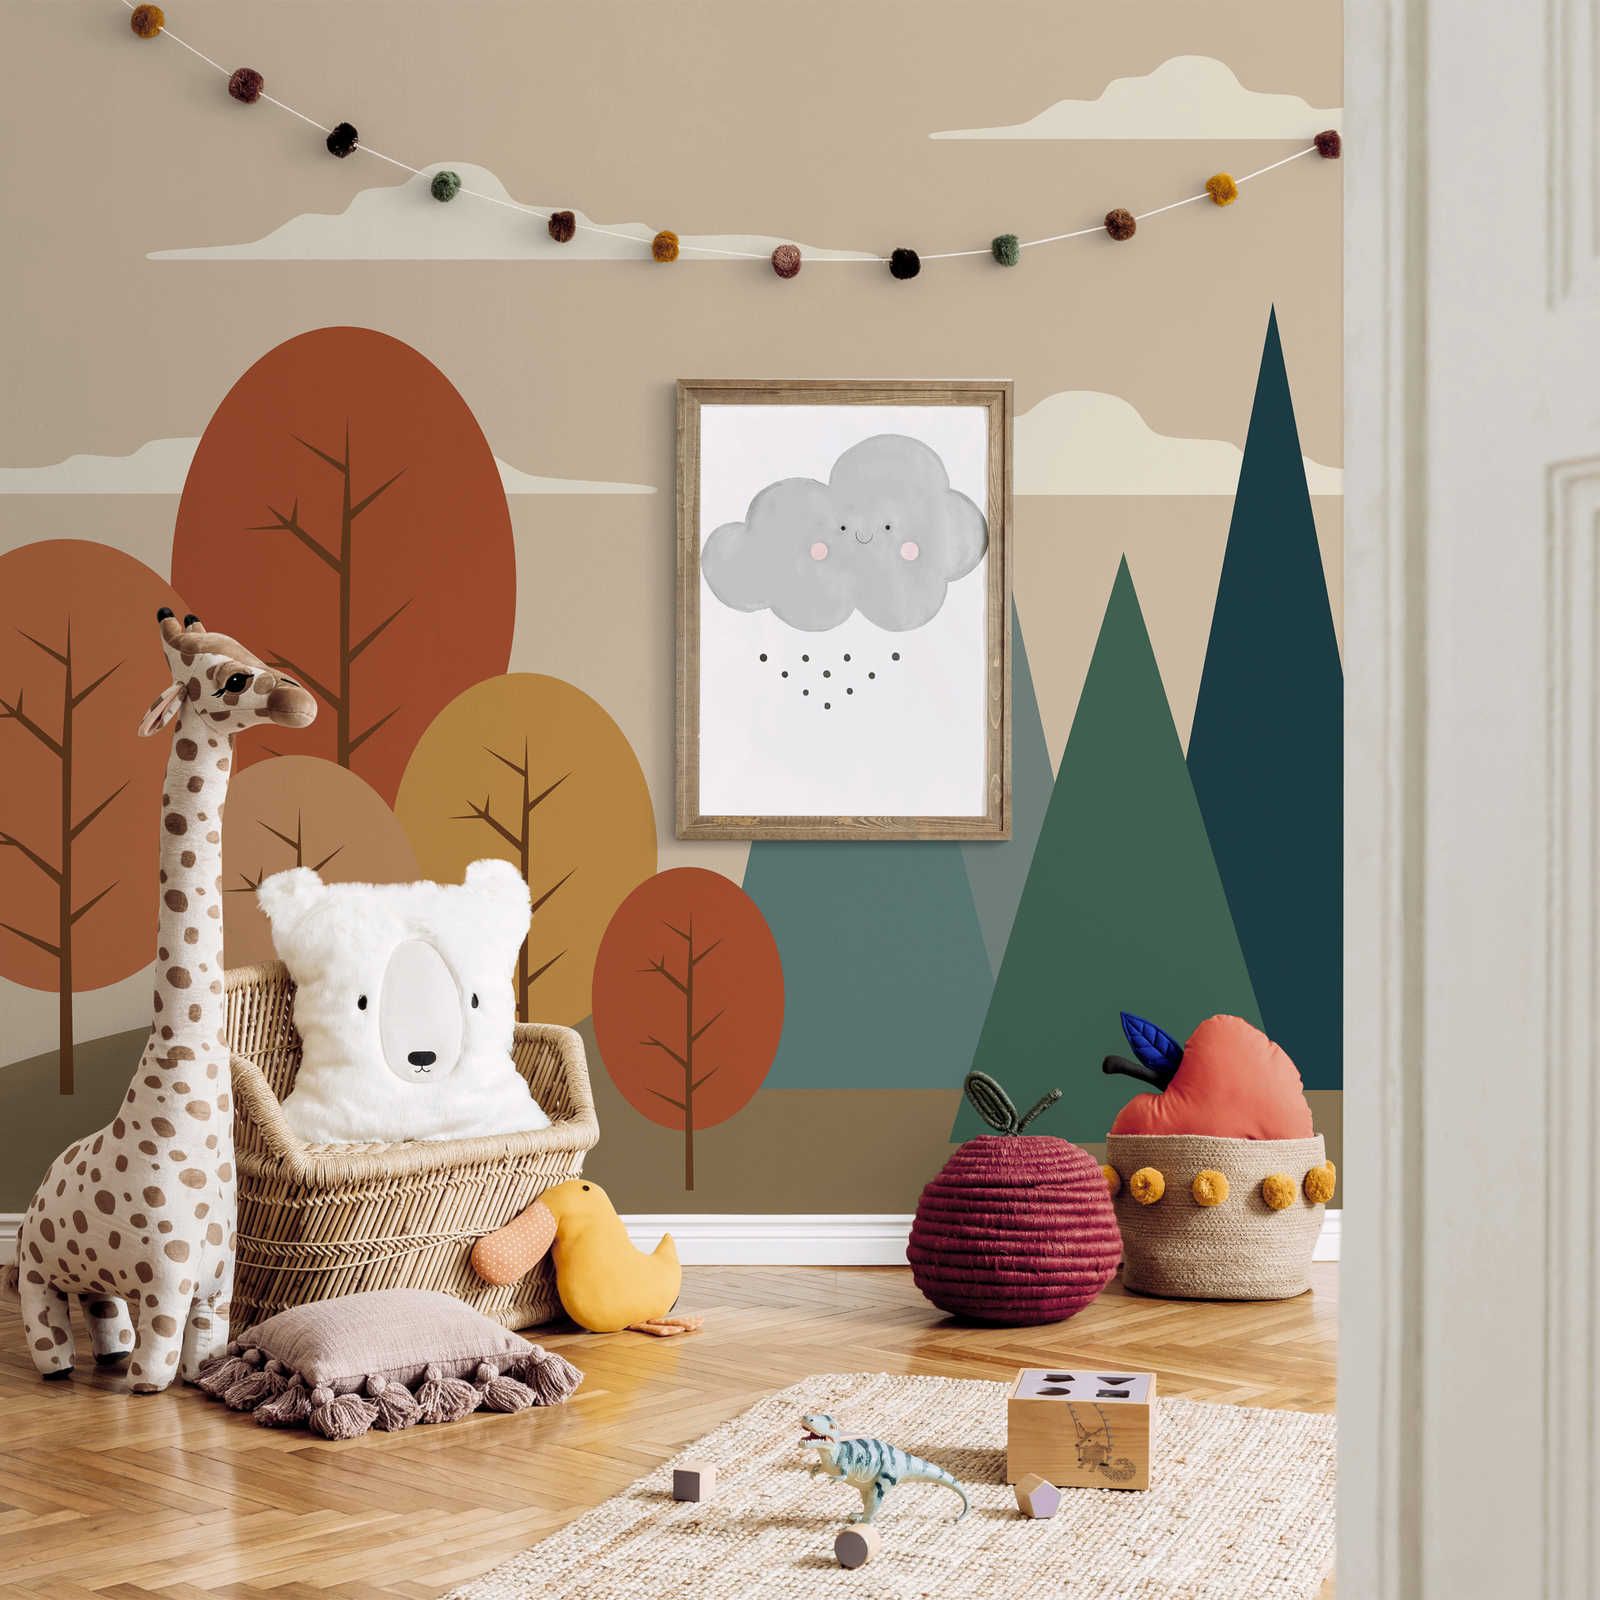 Photo wallpaper Enchanted Forest with geometric shapes - Smooth & matt non-woven
